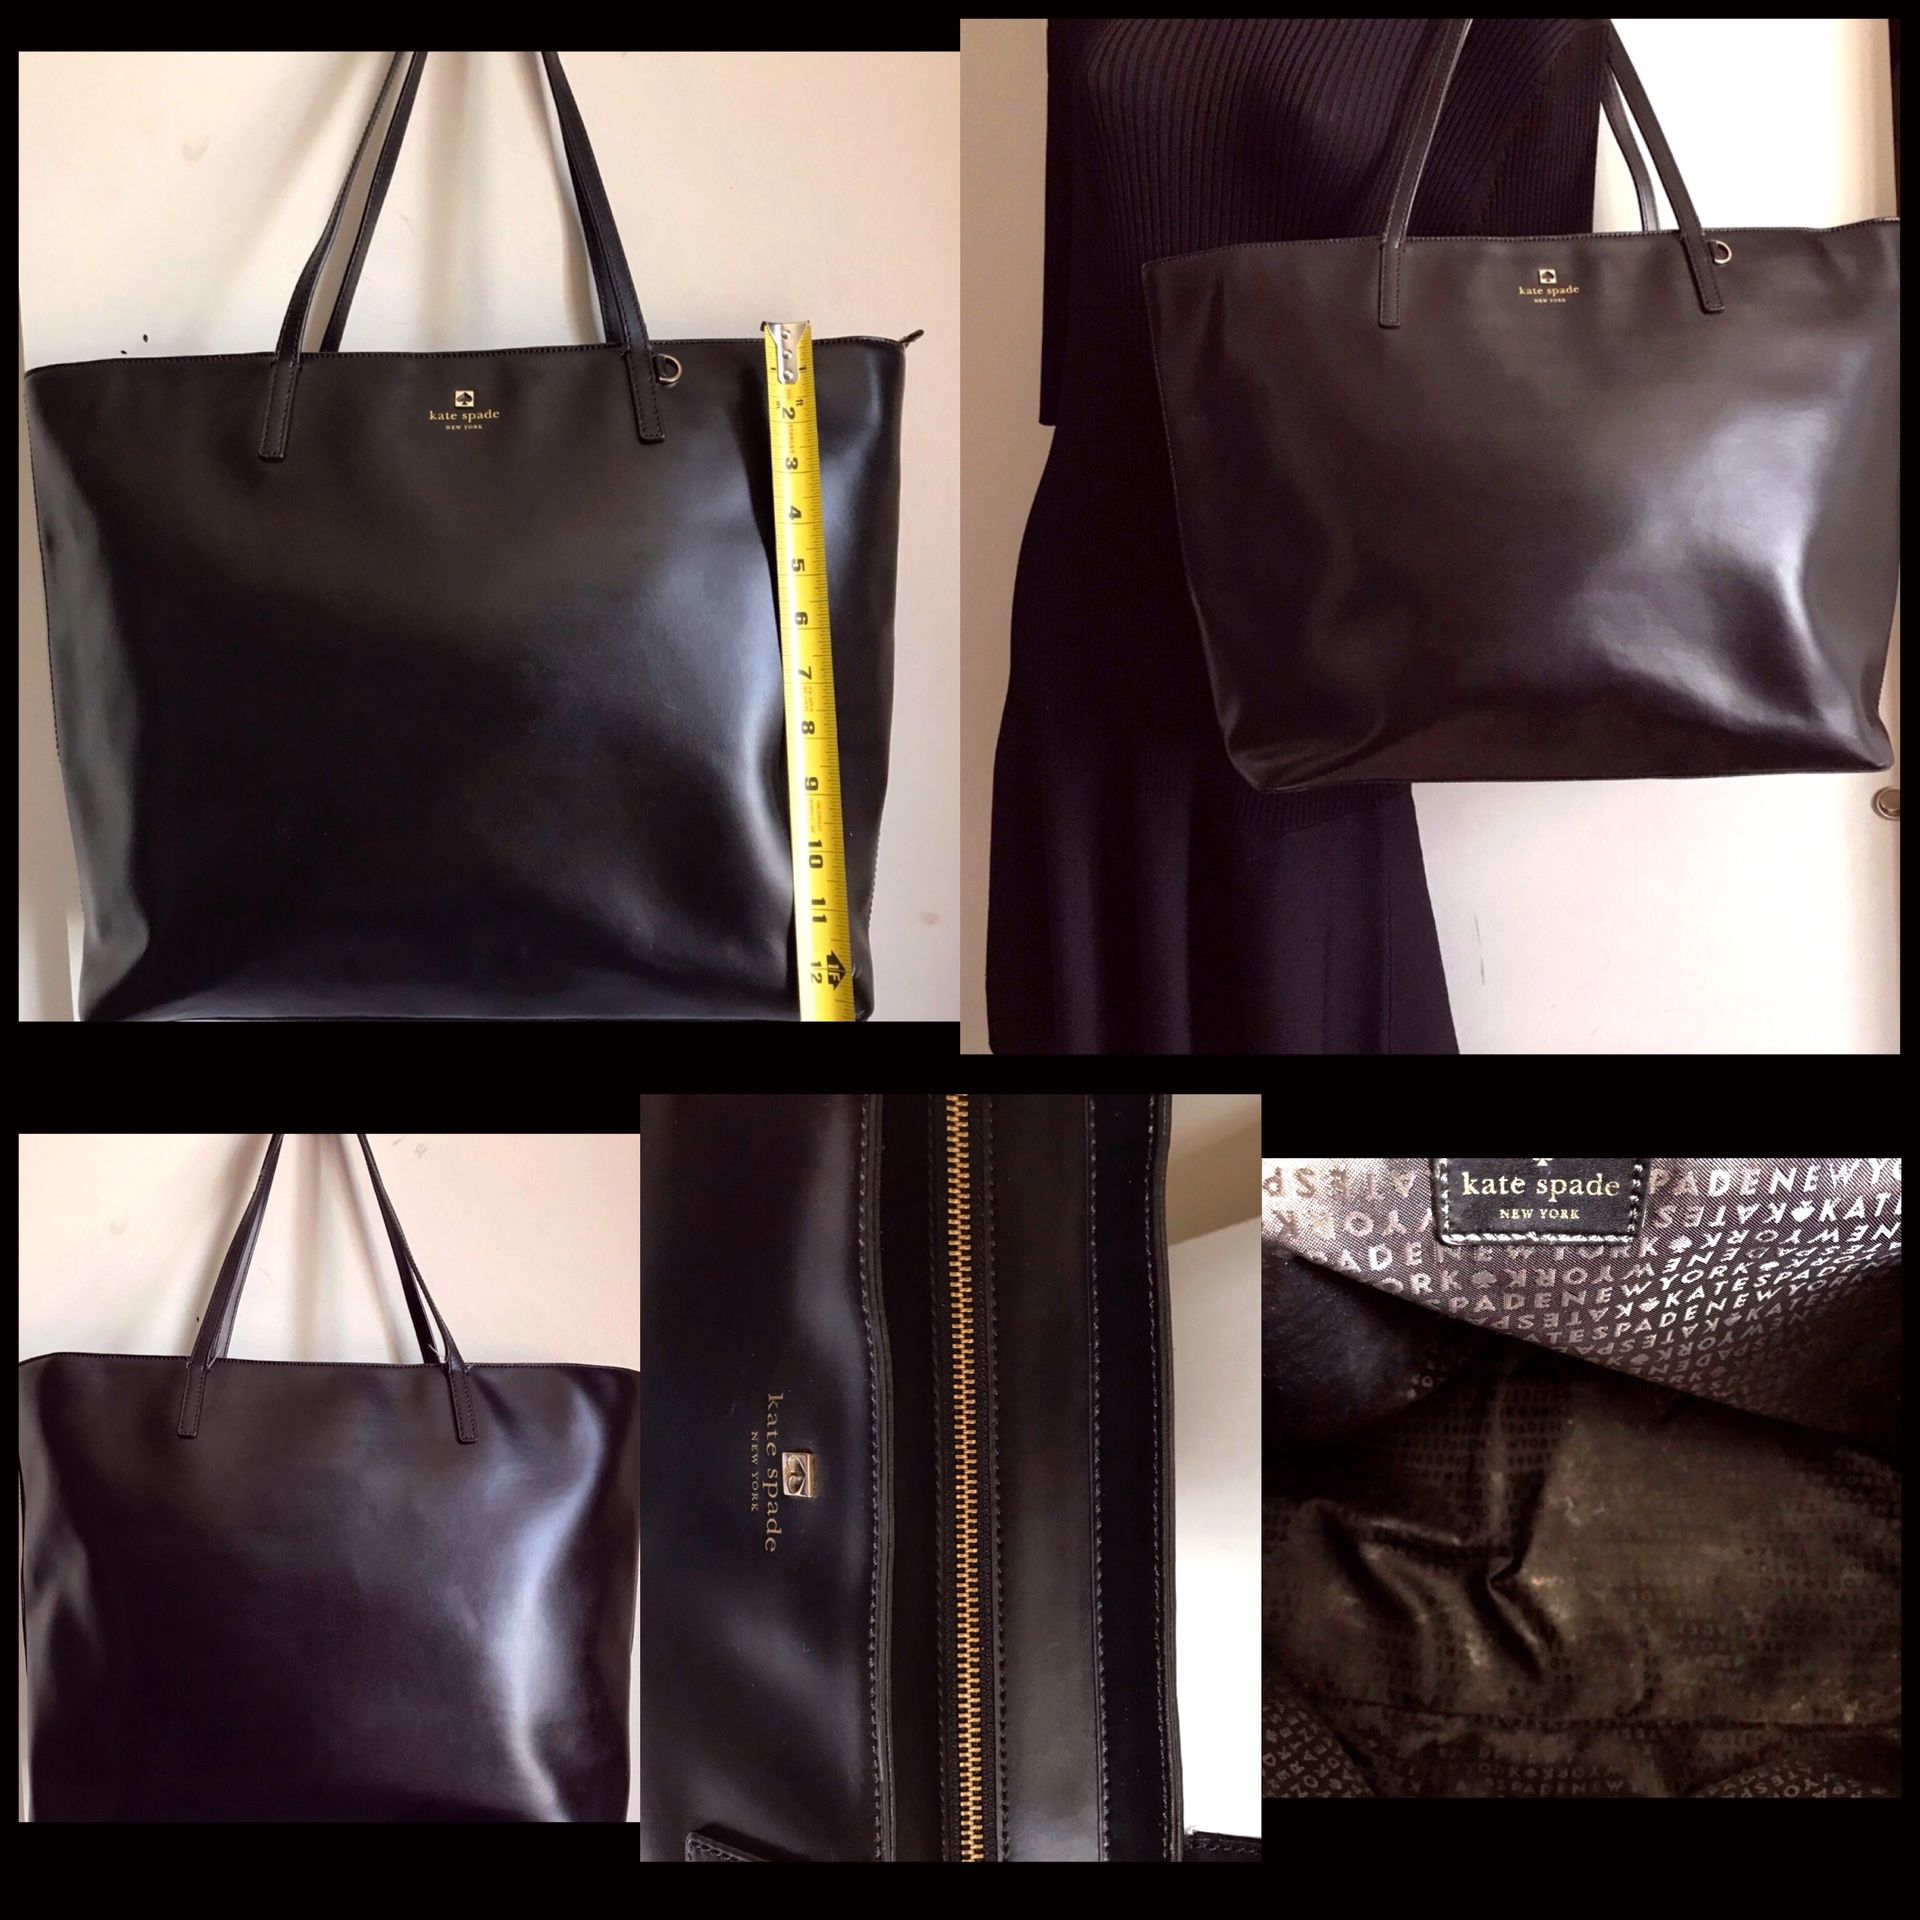 Oversized Kate Spade leather tote bag